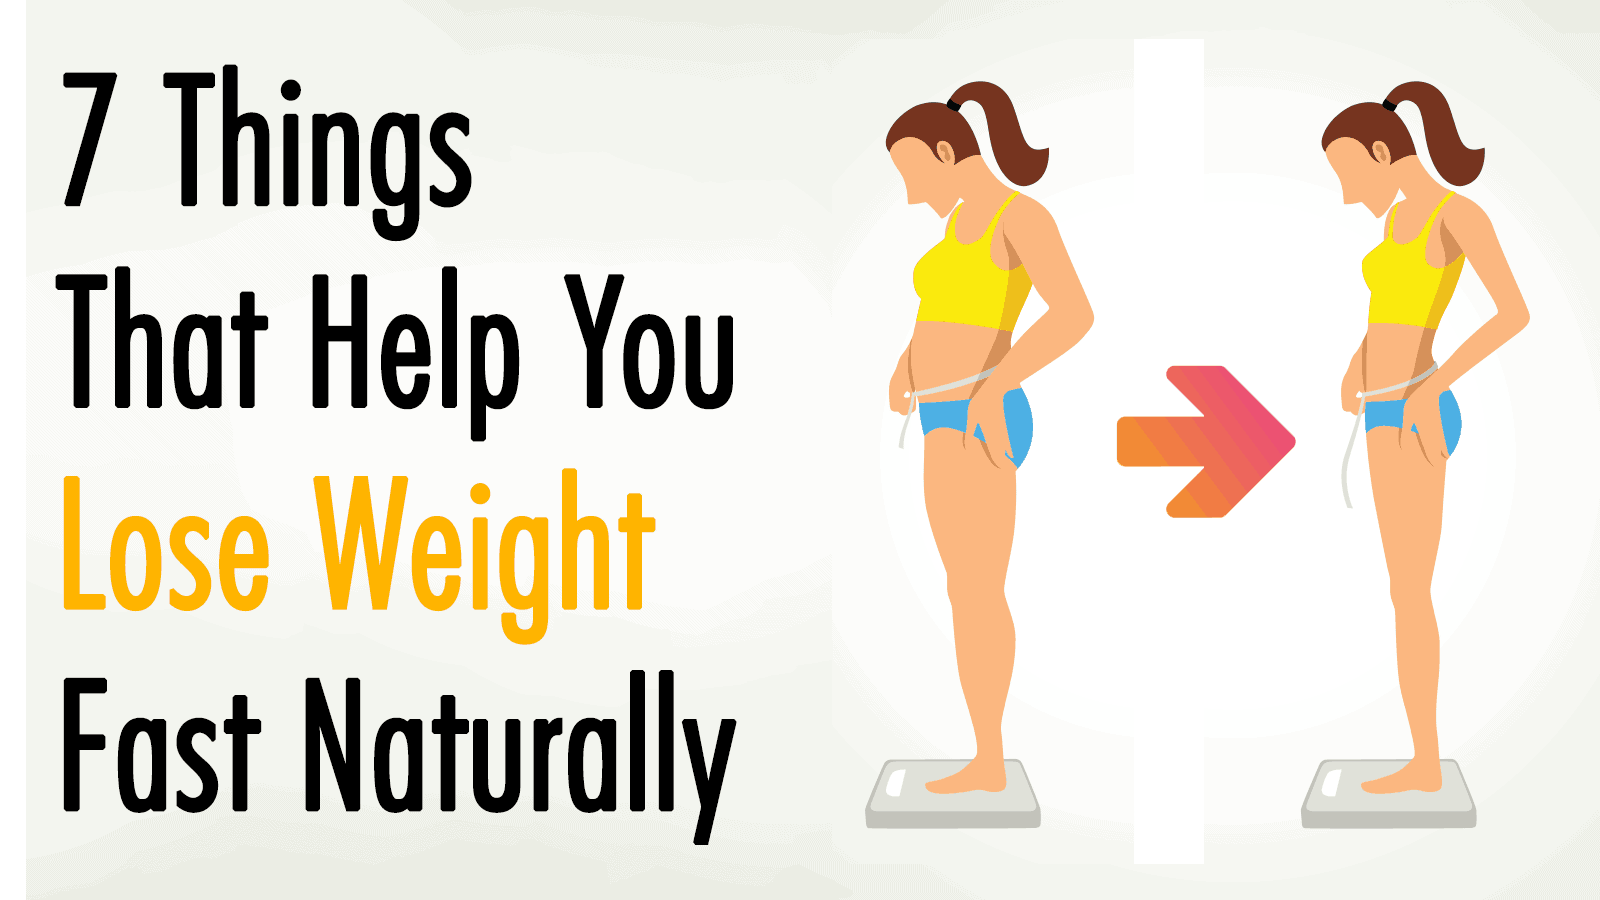 How to Lose Weight Fast: 12 Simple Steps, Based on Science